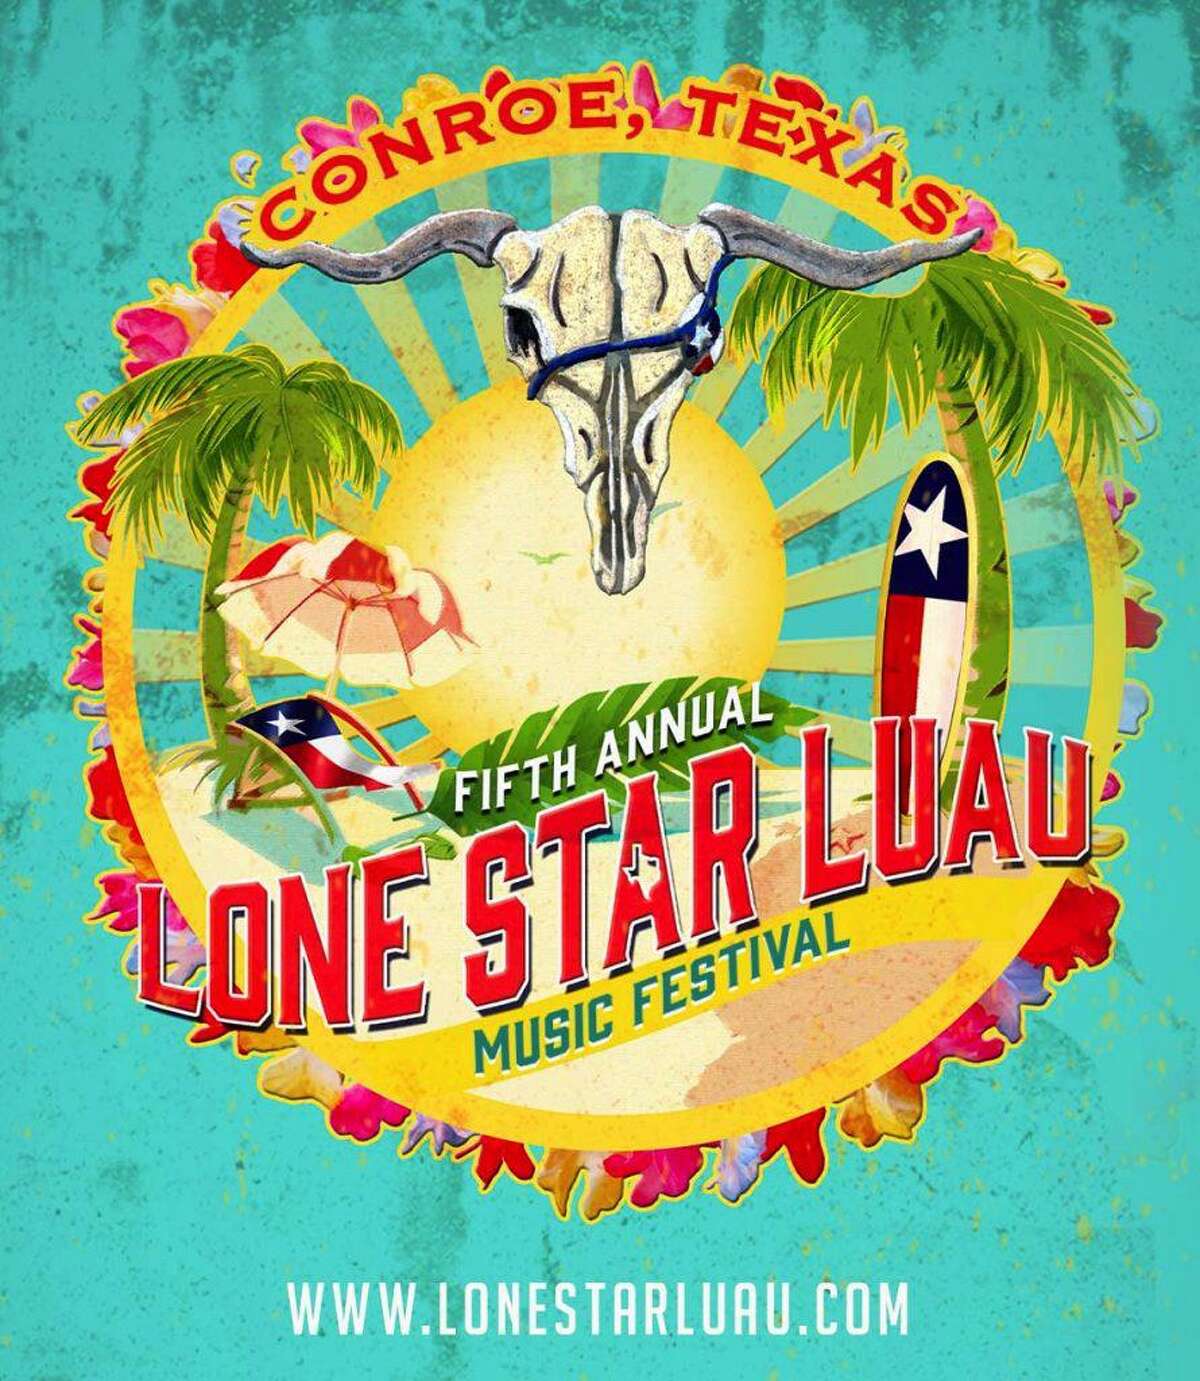 Trop Rock musicians Thom Shepherd and Coley McCabe are bringing the Lone Star Luau event to Margaritaville Feb. 3-6.